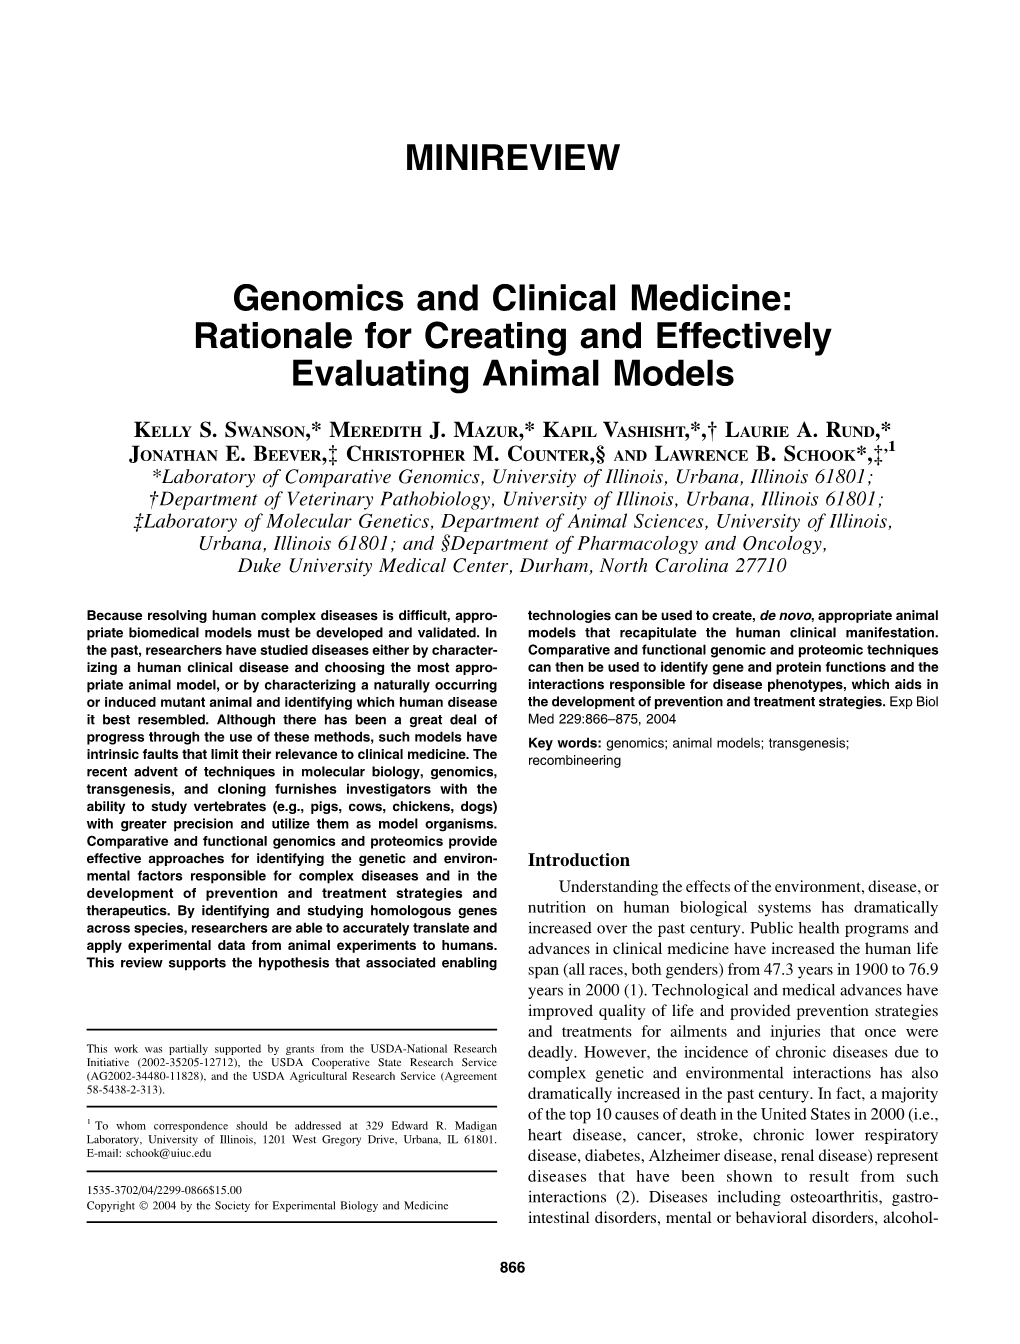 MINIREVIEW Genomics and Clinical Medicine: Rationale for Creating